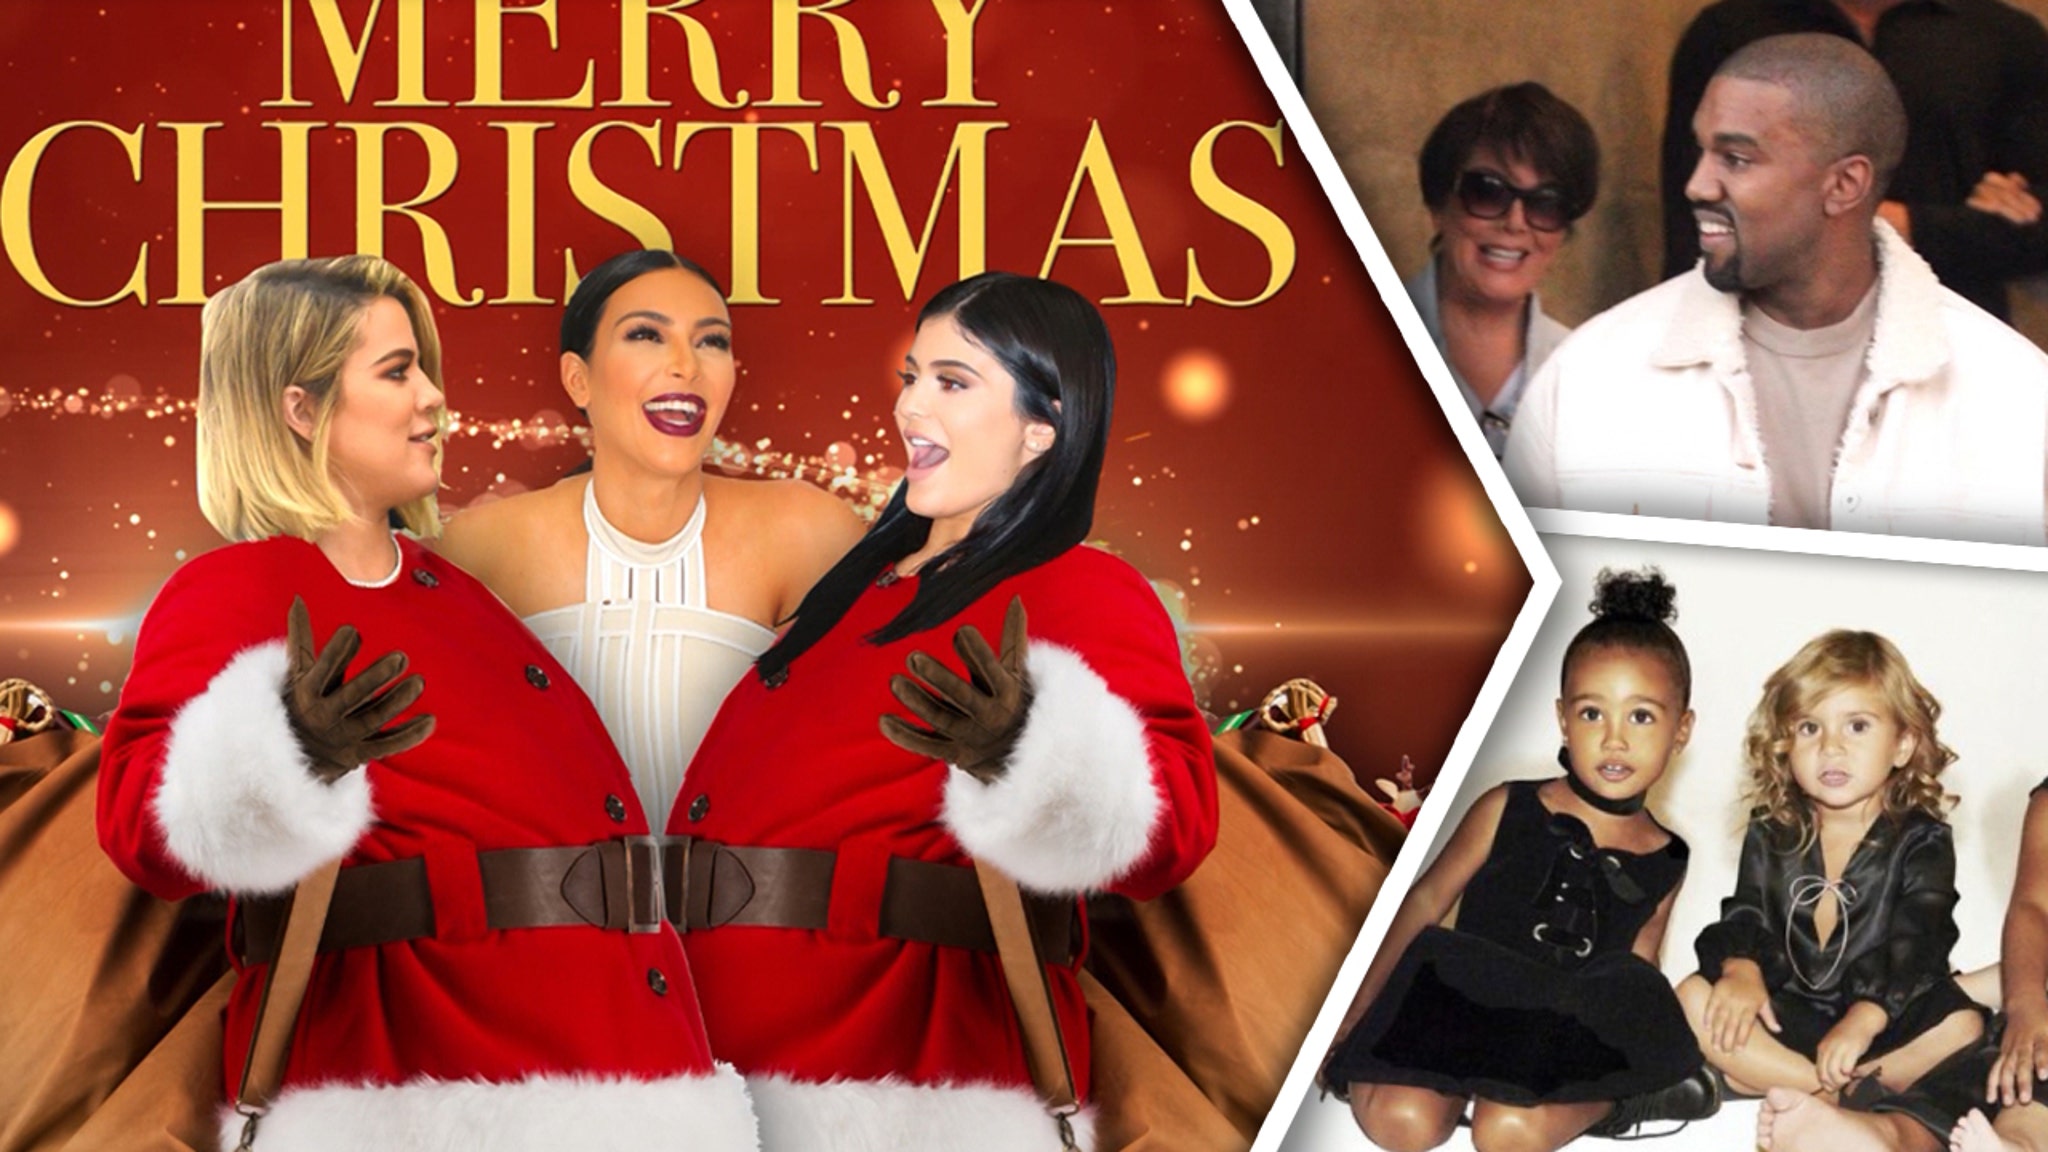 The Kardashian Christmas Card Will Be Extra Big This Year!